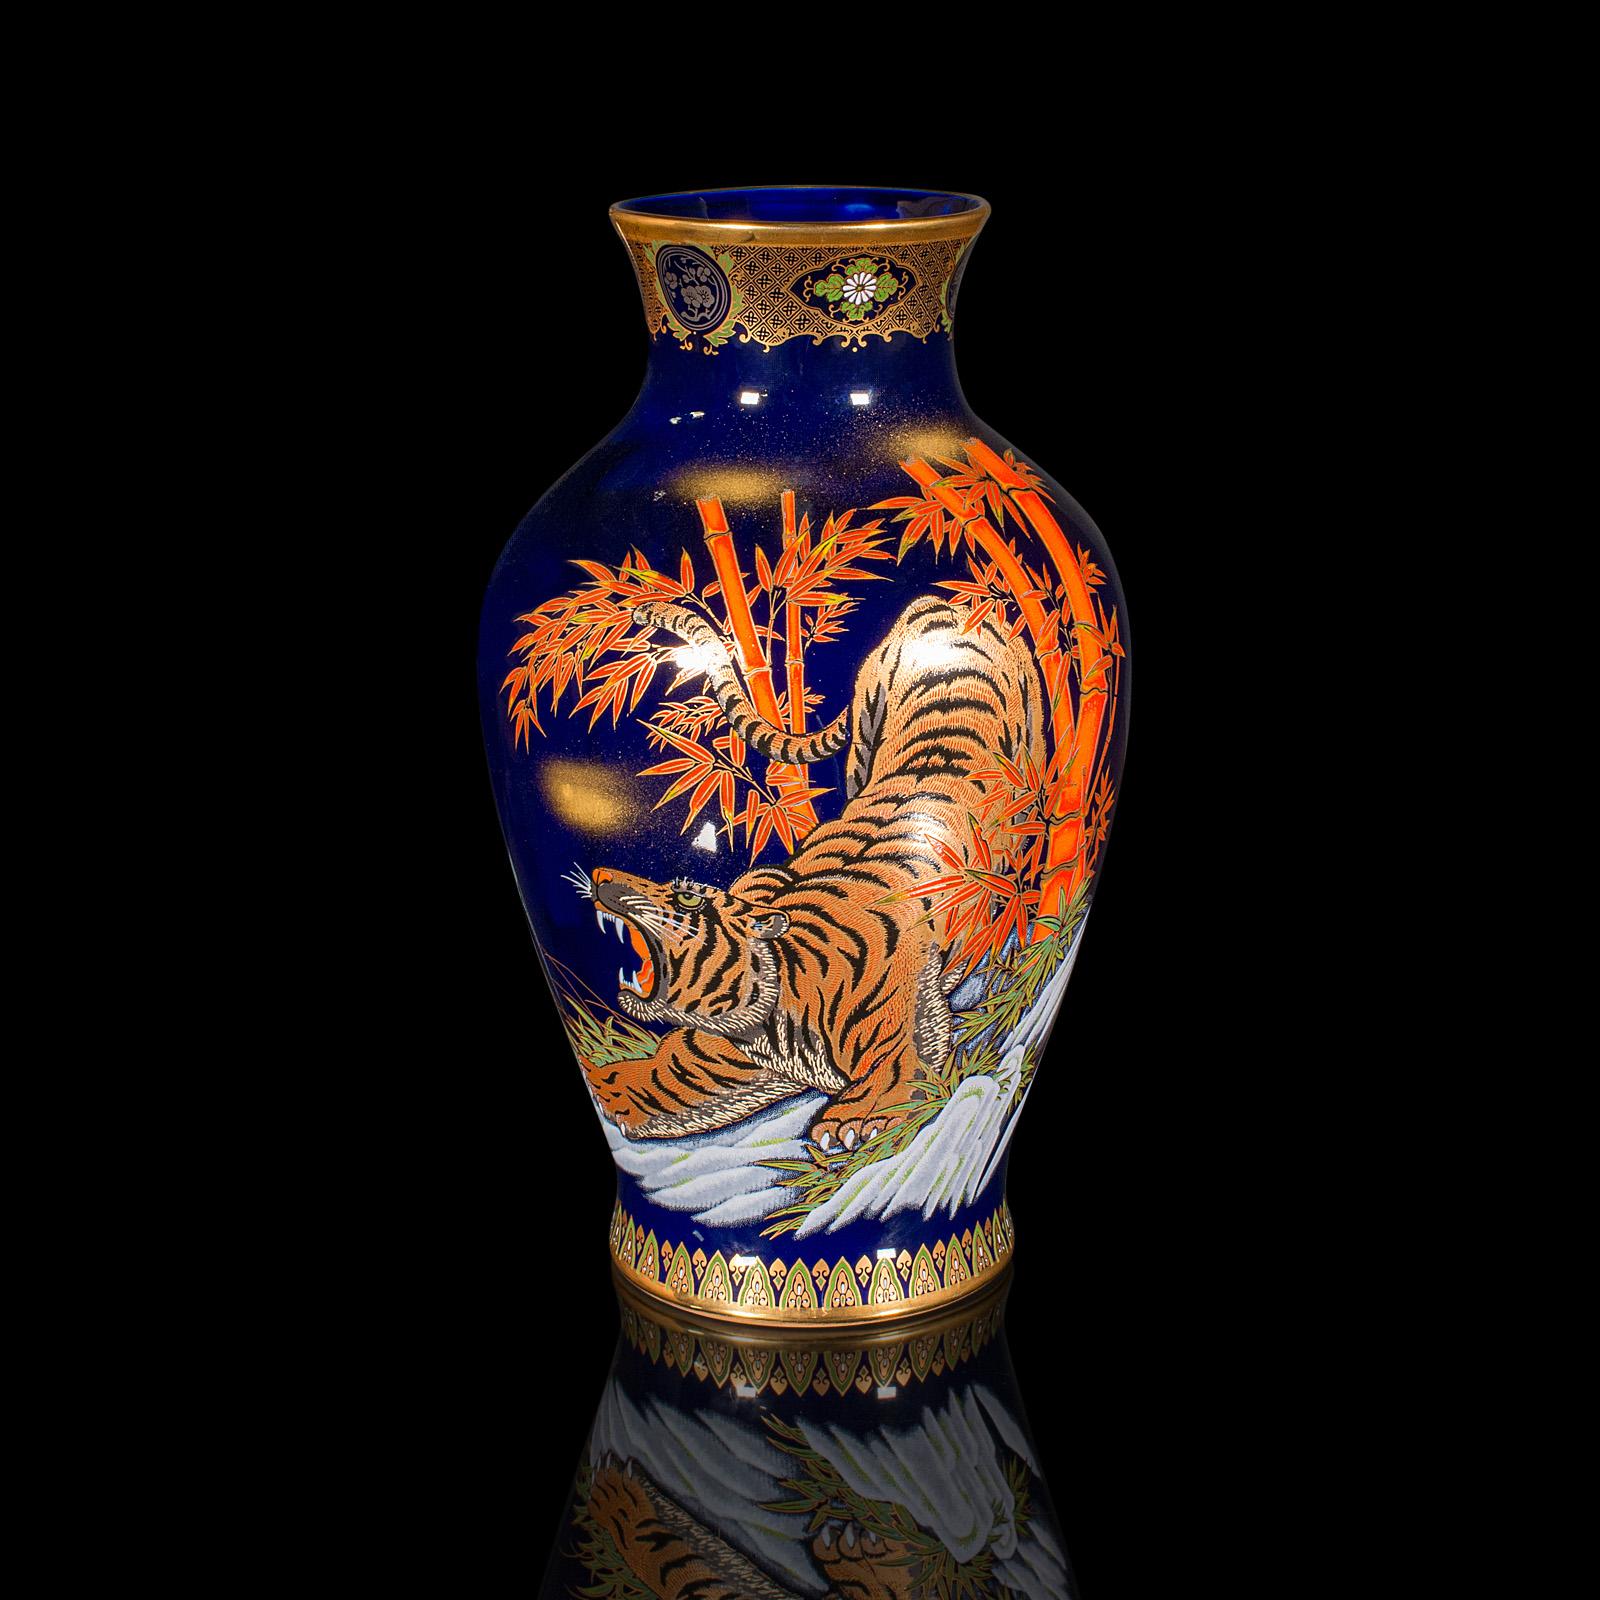 This is a vintage tiger vase. A Chinese, lacquer ceramic baluster urn, dating to the late 20th century, circa 1980.

Striking motif accentuates this generously sized vase
Displays a desirable aged patina and in good order
Appealing blue lacquer